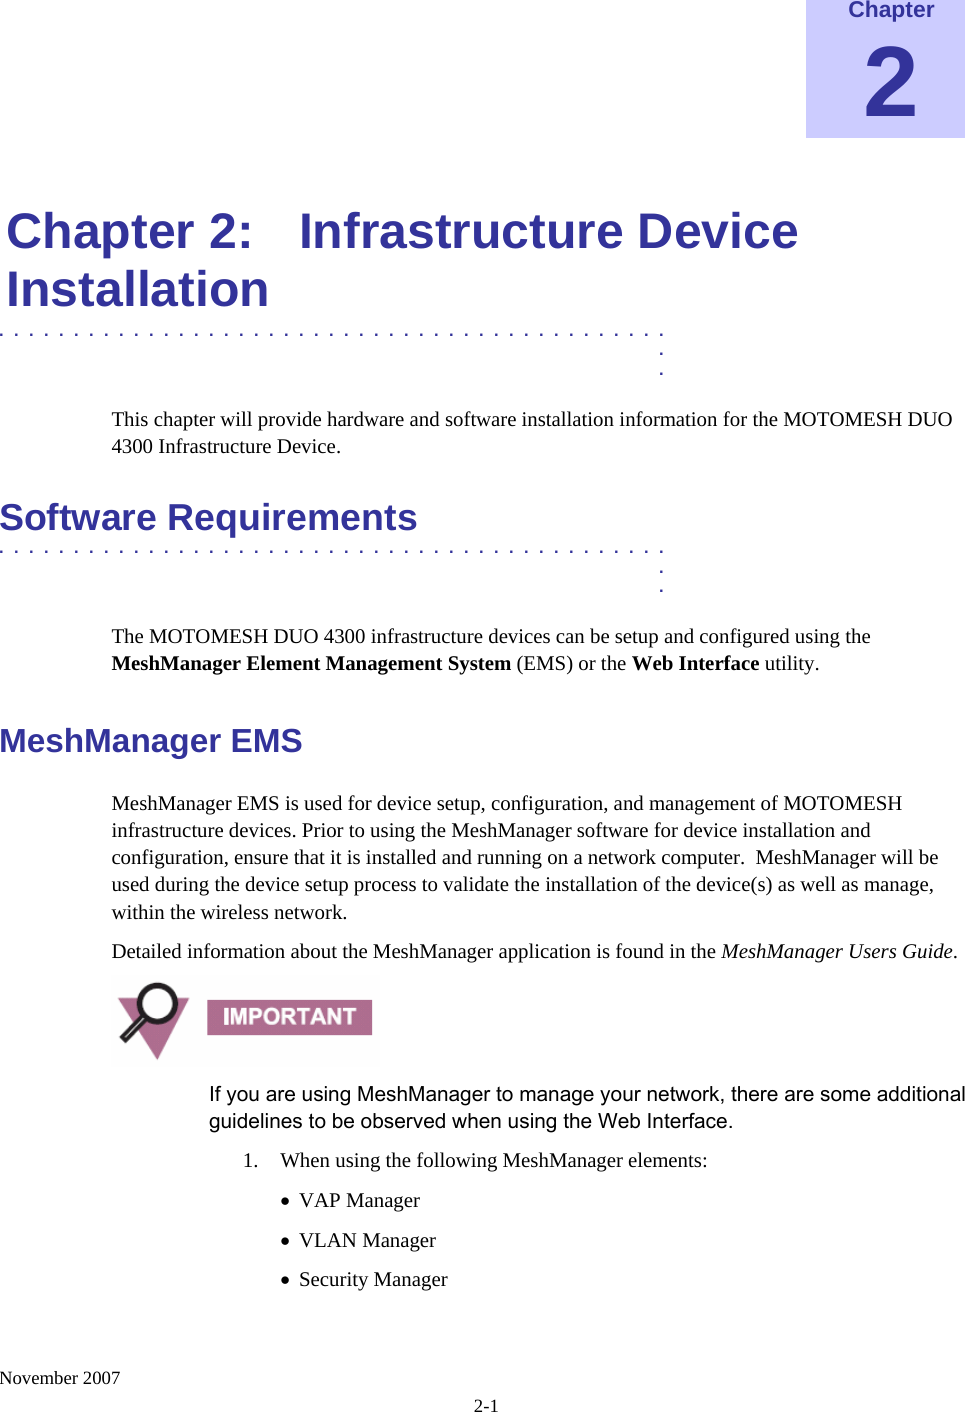    November 2007 2-1 Chapter 2  Chapter 2:  Infrastructure Device Installation .............................................  .  . This chapter will provide hardware and software installation information for the MOTOMESH DUO 4300 Infrastructure Device. Software Requirements .............................................  .  . The MOTOMESH DUO 4300 infrastructure devices can be setup and configured using the MeshManager Element Management System (EMS) or the Web Interface utility. MeshManager EMS MeshManager EMS is used for device setup, configuration, and management of MOTOMESH infrastructure devices. Prior to using the MeshManager software for device installation and configuration, ensure that it is installed and running on a network computer.  MeshManager will be used during the device setup process to validate the installation of the device(s) as well as manage, within the wireless network. Detailed information about the MeshManager application is found in the MeshManager Users Guide.  If you are using MeshManager to manage your network, there are some additional guidelines to be observed when using the Web Interface. 1. When using the following MeshManager elements: • VAP Manager • VLAN Manager • Security Manager 